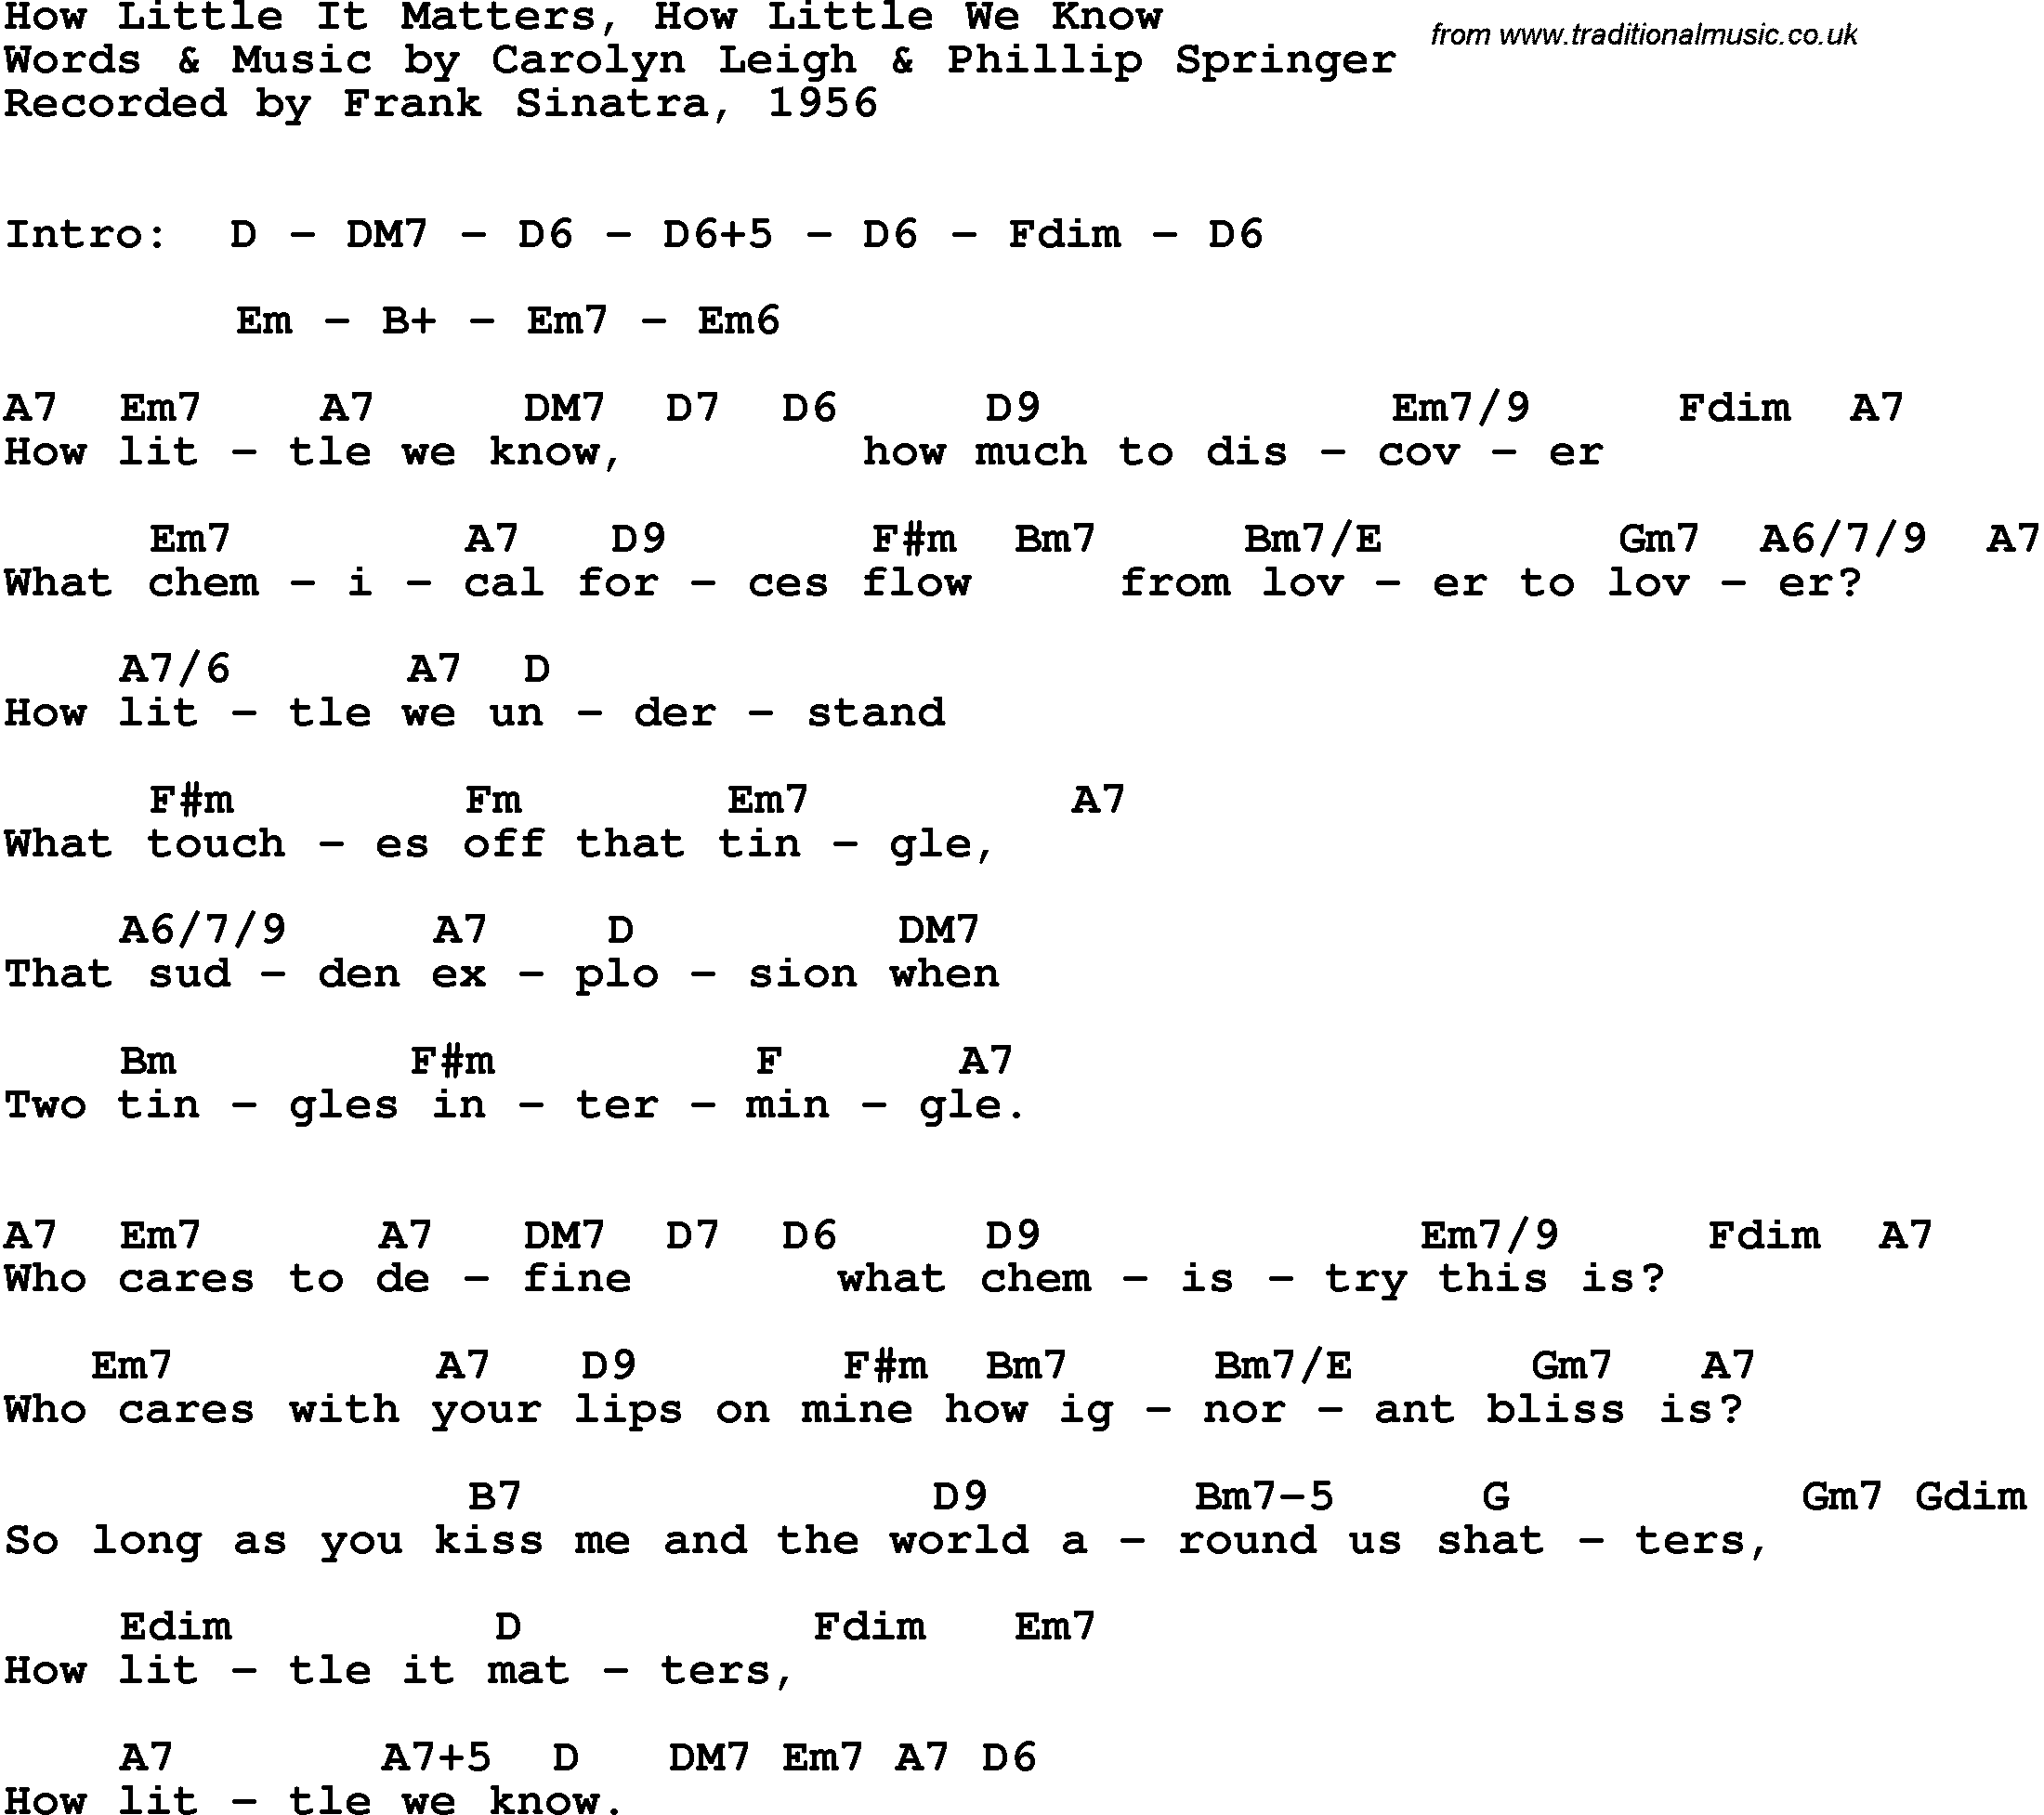 Song Lyrics with guitar chords for How Little It Matters, How Little We Know - Frank Sinatra, 1956